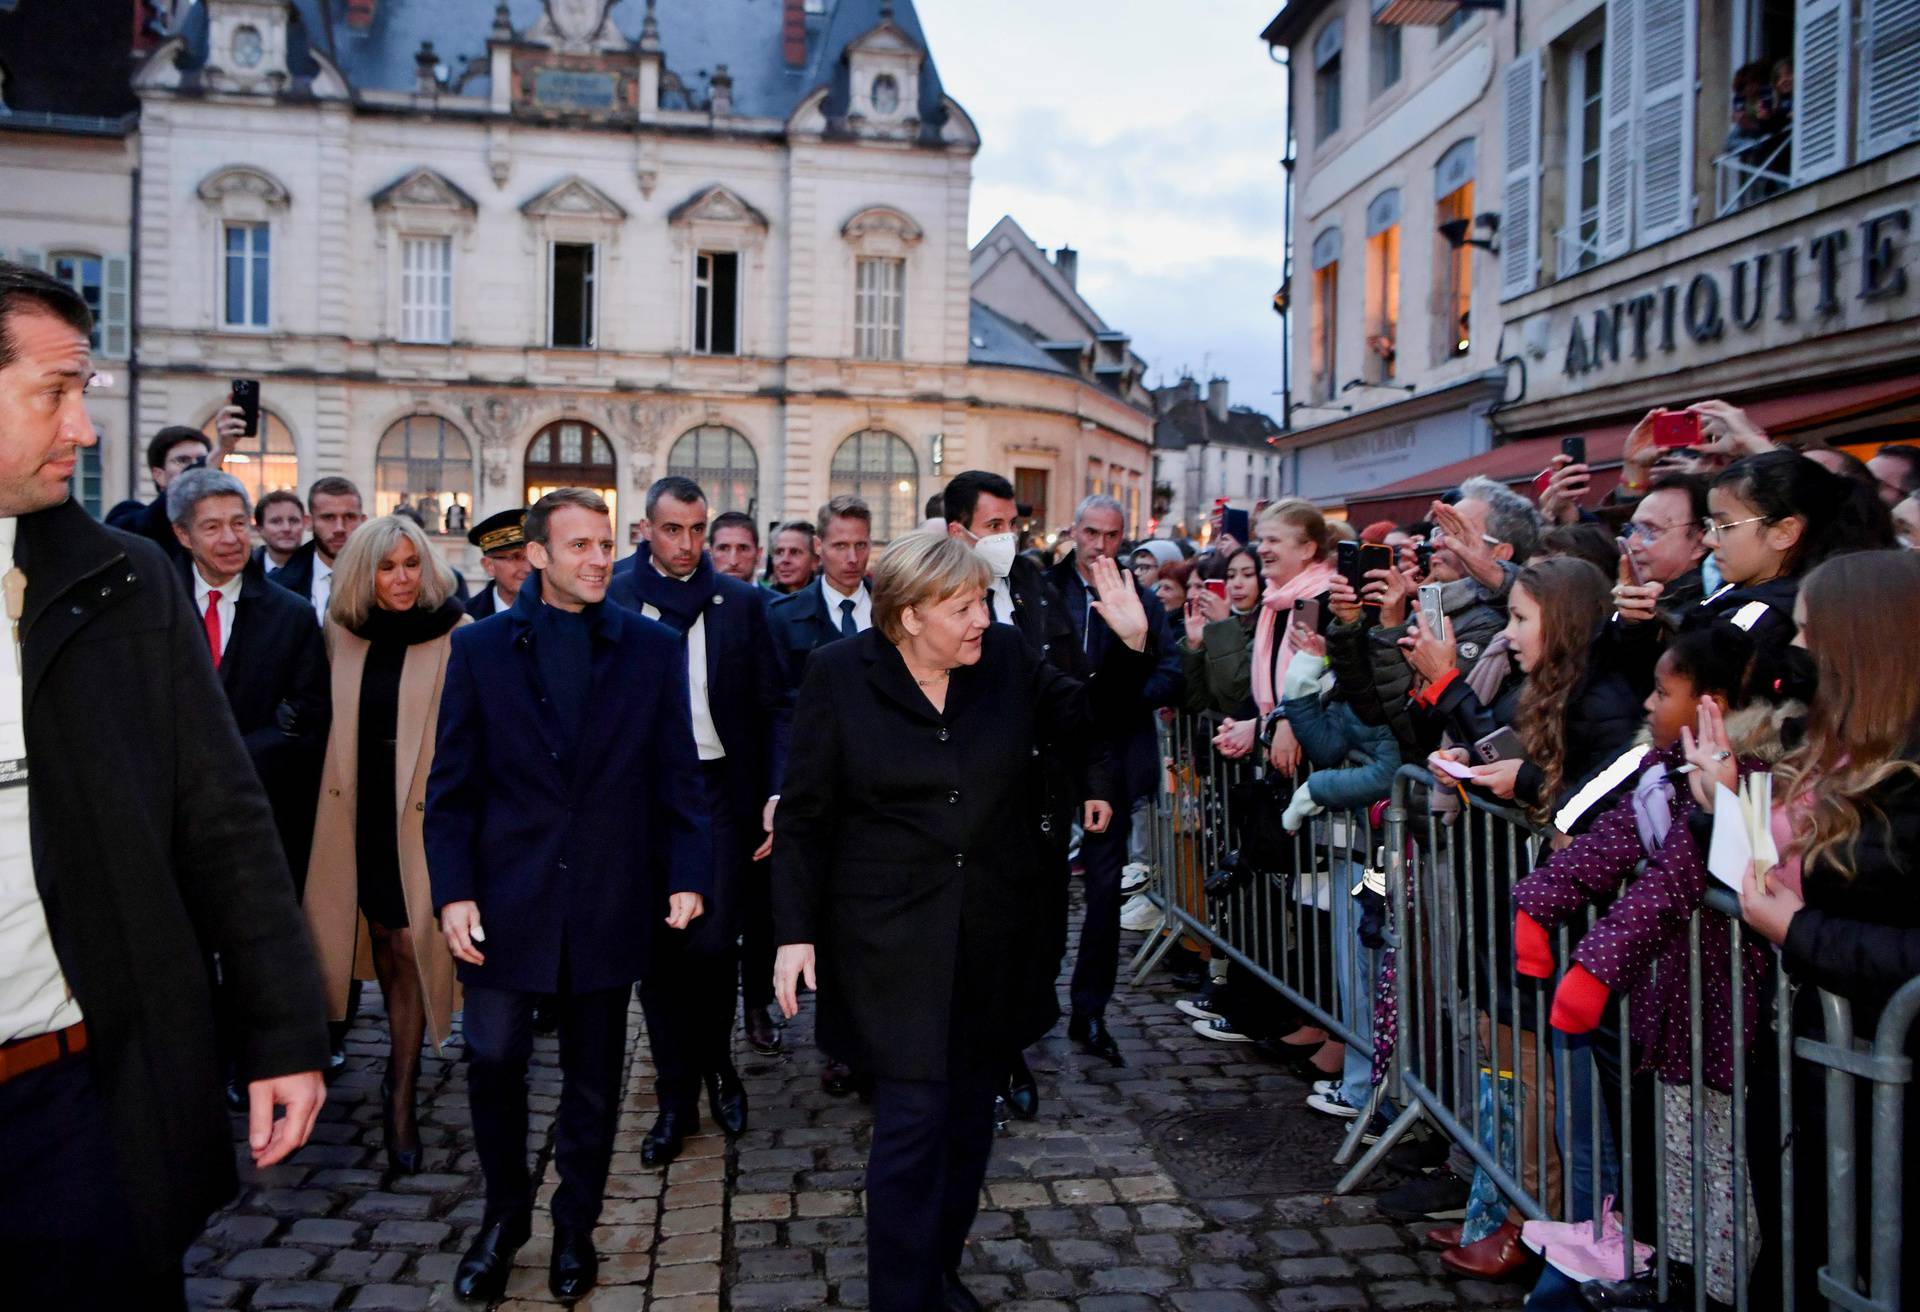 France's President Emmanuel Macron, flanked by his wife Brigitt Macron, is greeted by members of the public with outgoing German Chancellor Angela Merkel upon their arrival prior to talks, in Beaune